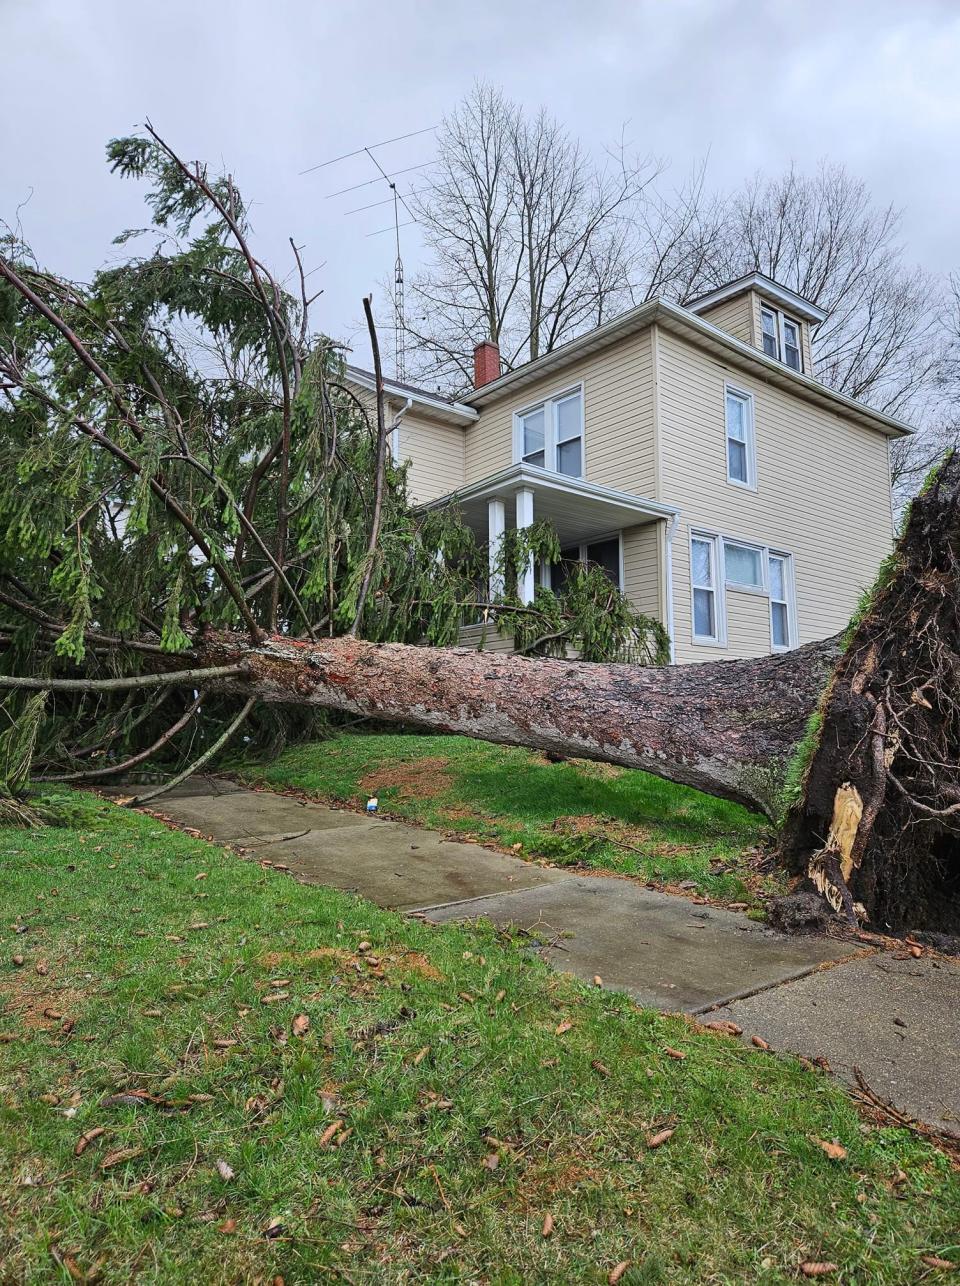 A large pine tree in Massillon fell onto Danielle Henderson's front porch, ripping her power lines and box from the house.